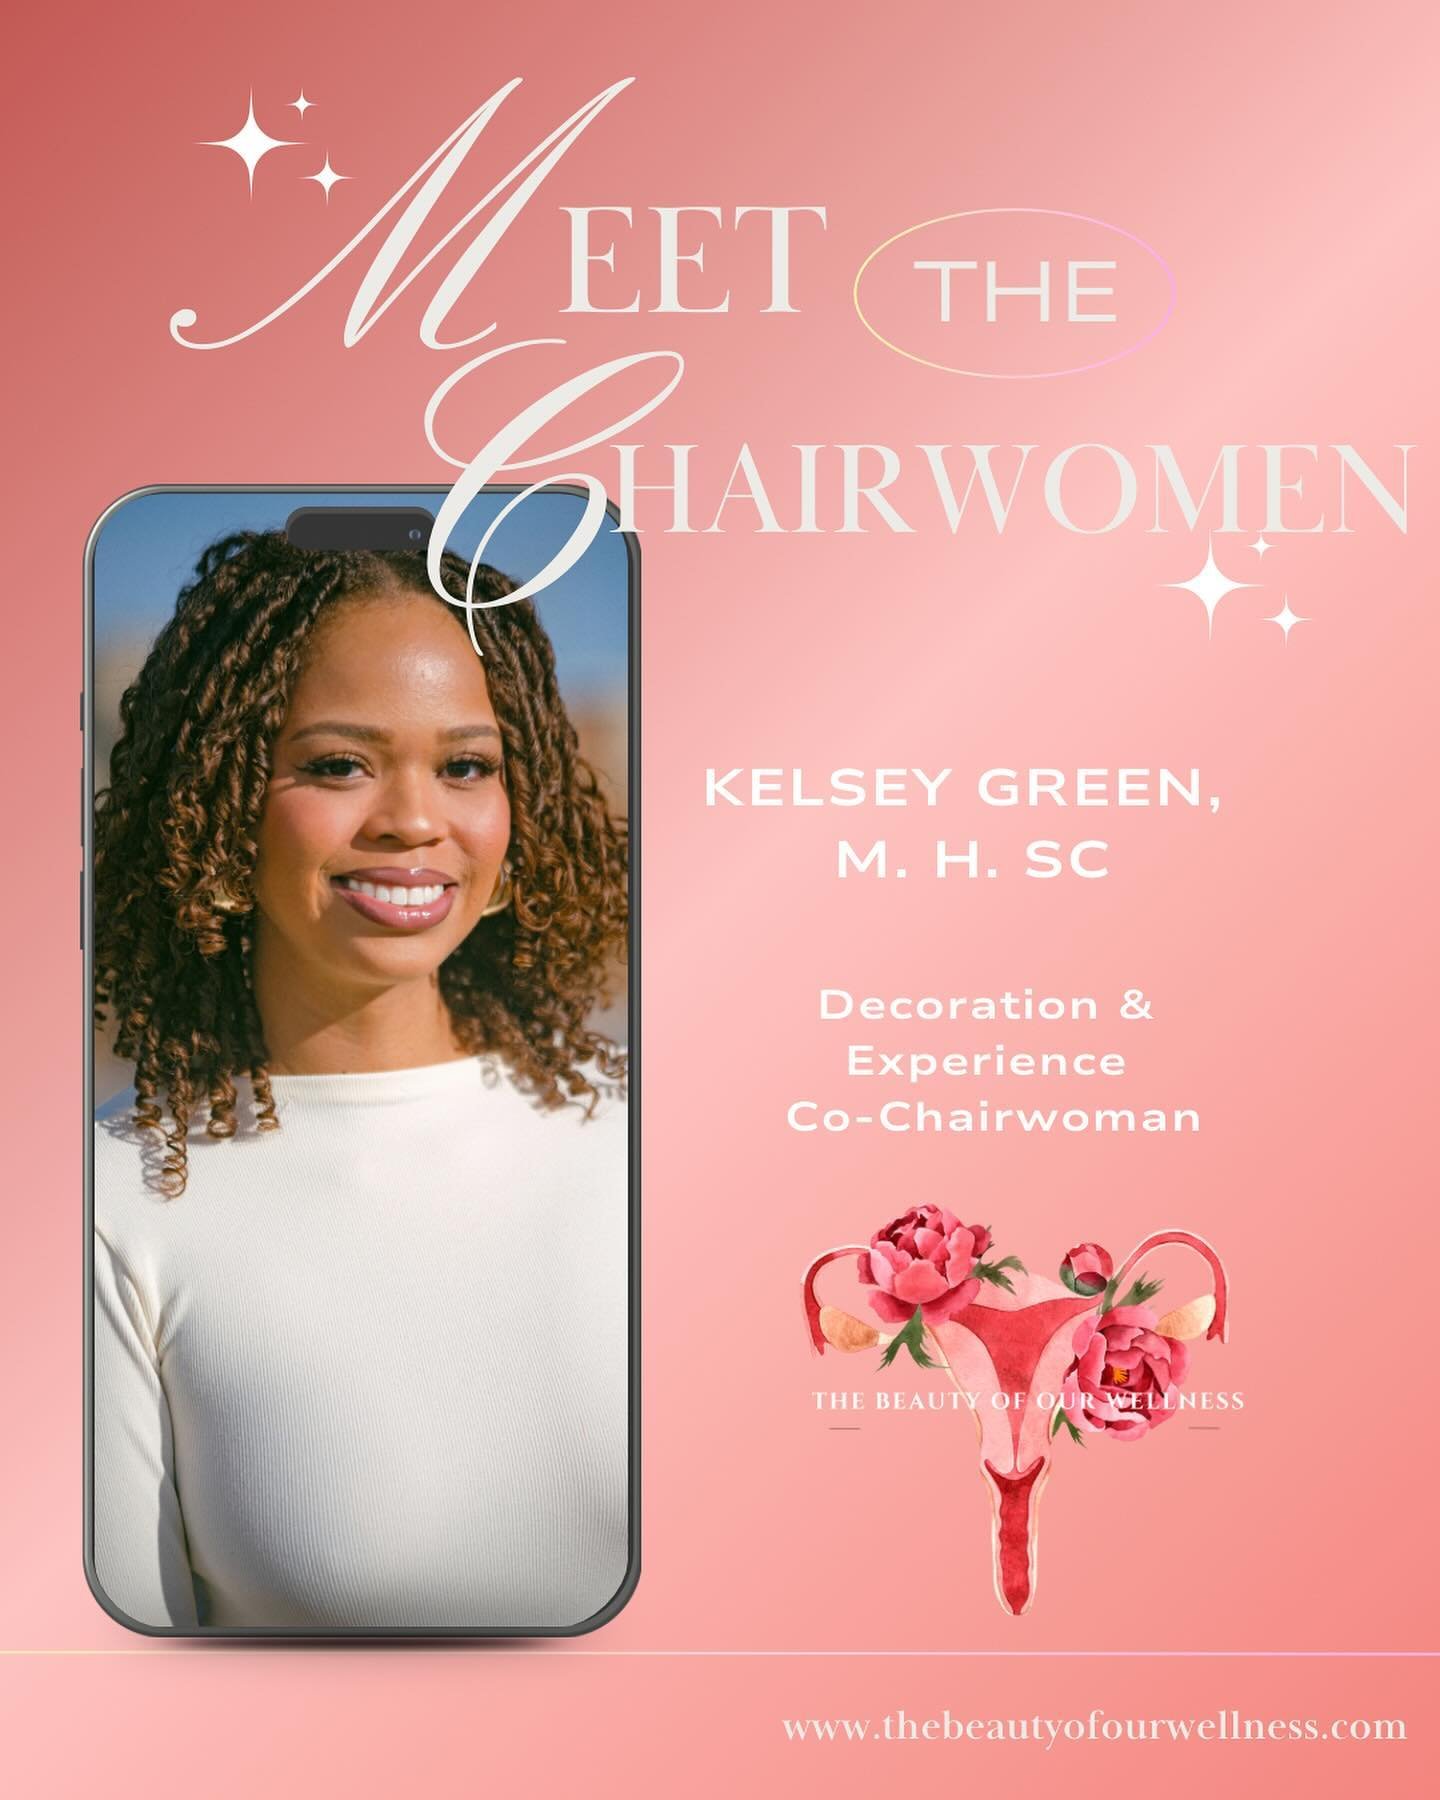 Meet our Event Decoration and Experience Co-Chairwoman Kelsey Green ✨ 

As a third year medical student at Howard University and MHSc graduate of Meharry Medical College, Green&rsquo;s passion for Women&rsquo;s health &amp; wellness is evident in her